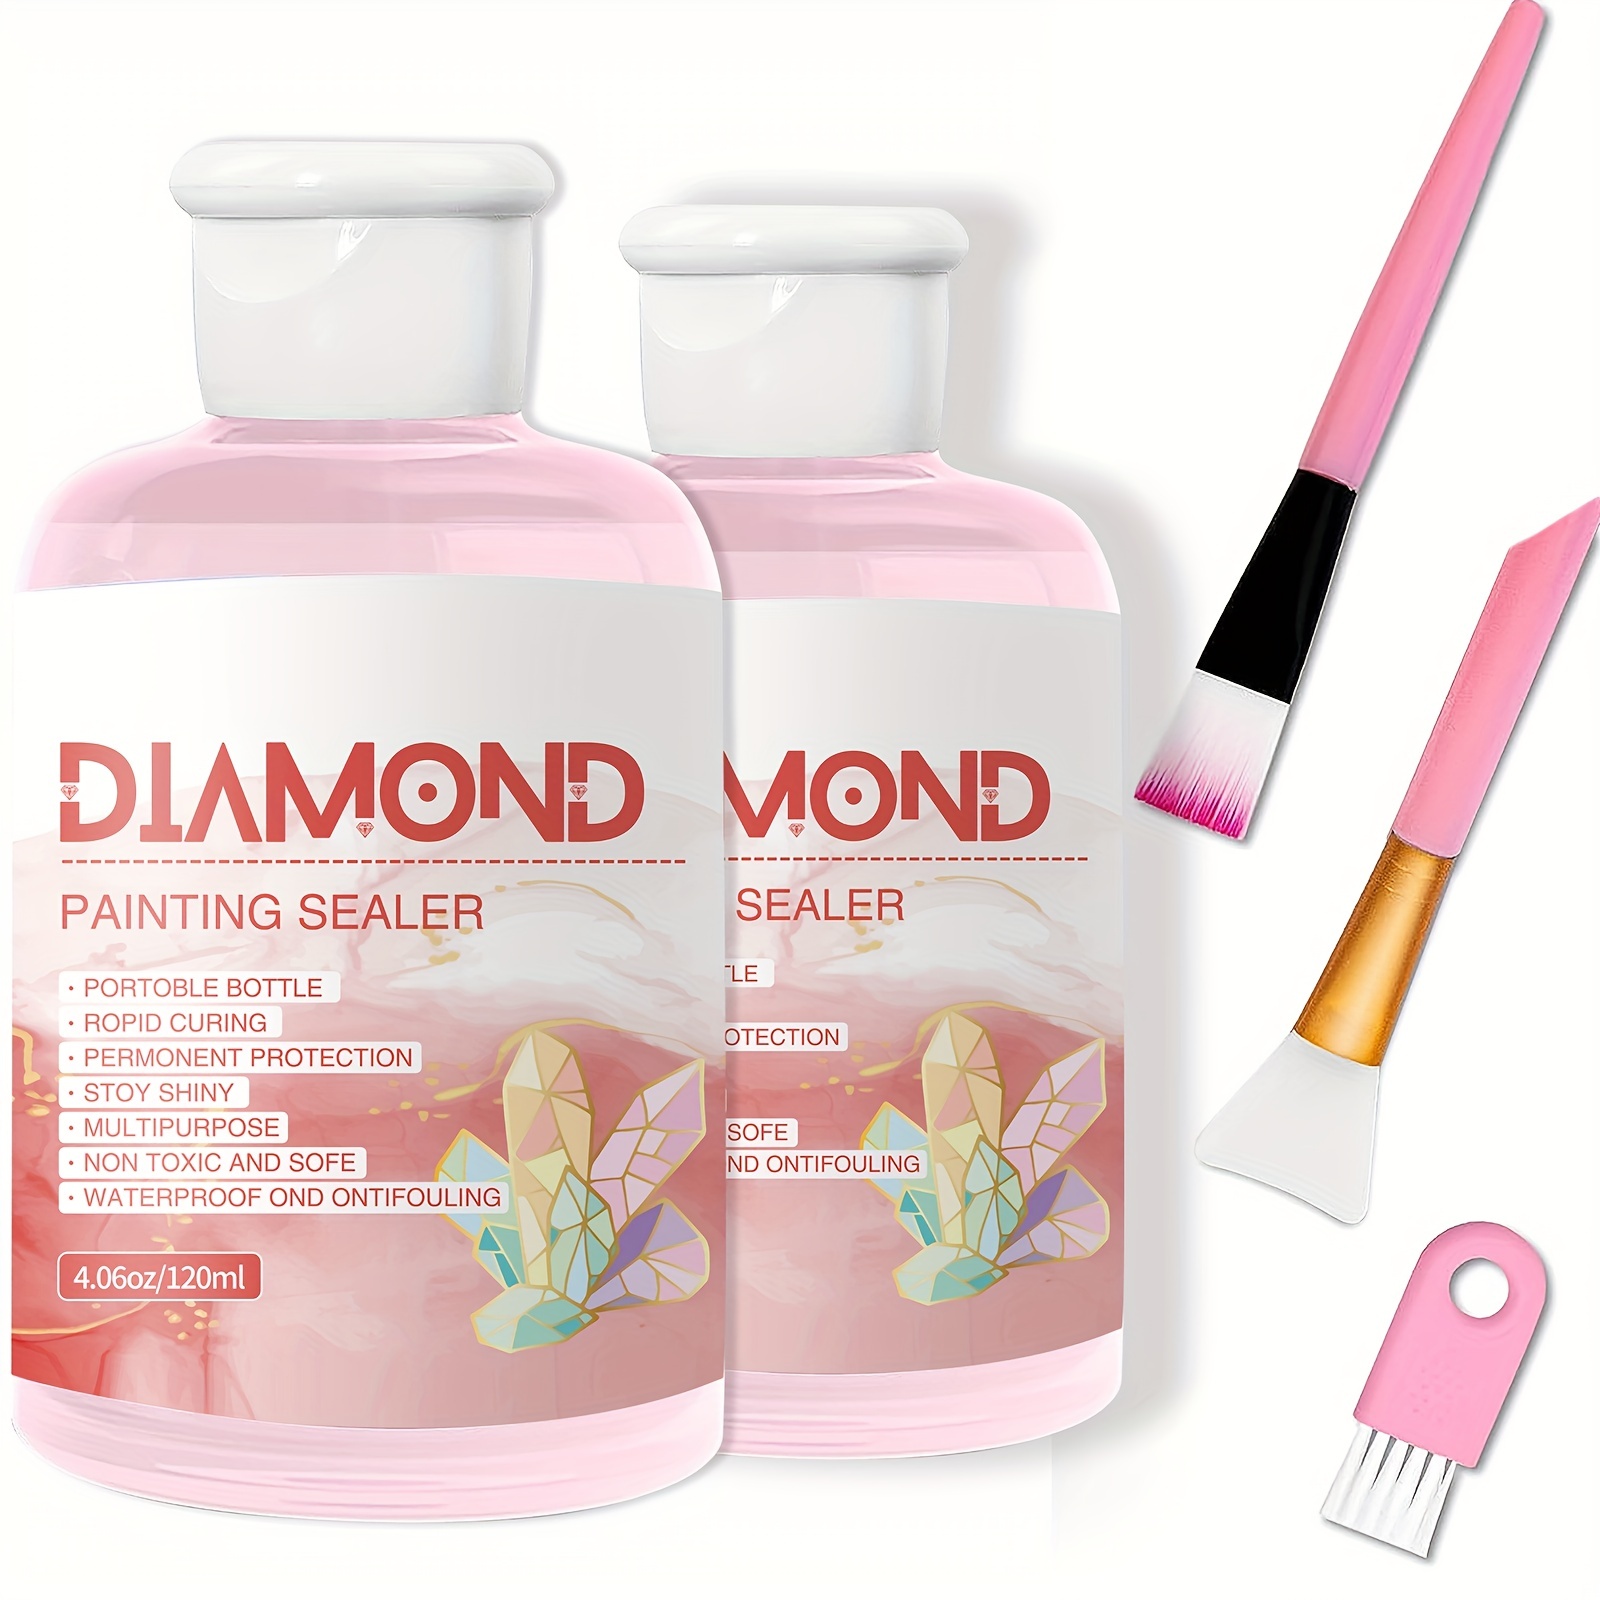 Diamond Painting Sealer Kits - High Gloss Sealer Glue for Diamond Art, with  Resin Pen Tools and Accessories, Permanent Sparkle & Shine Effect Sealer